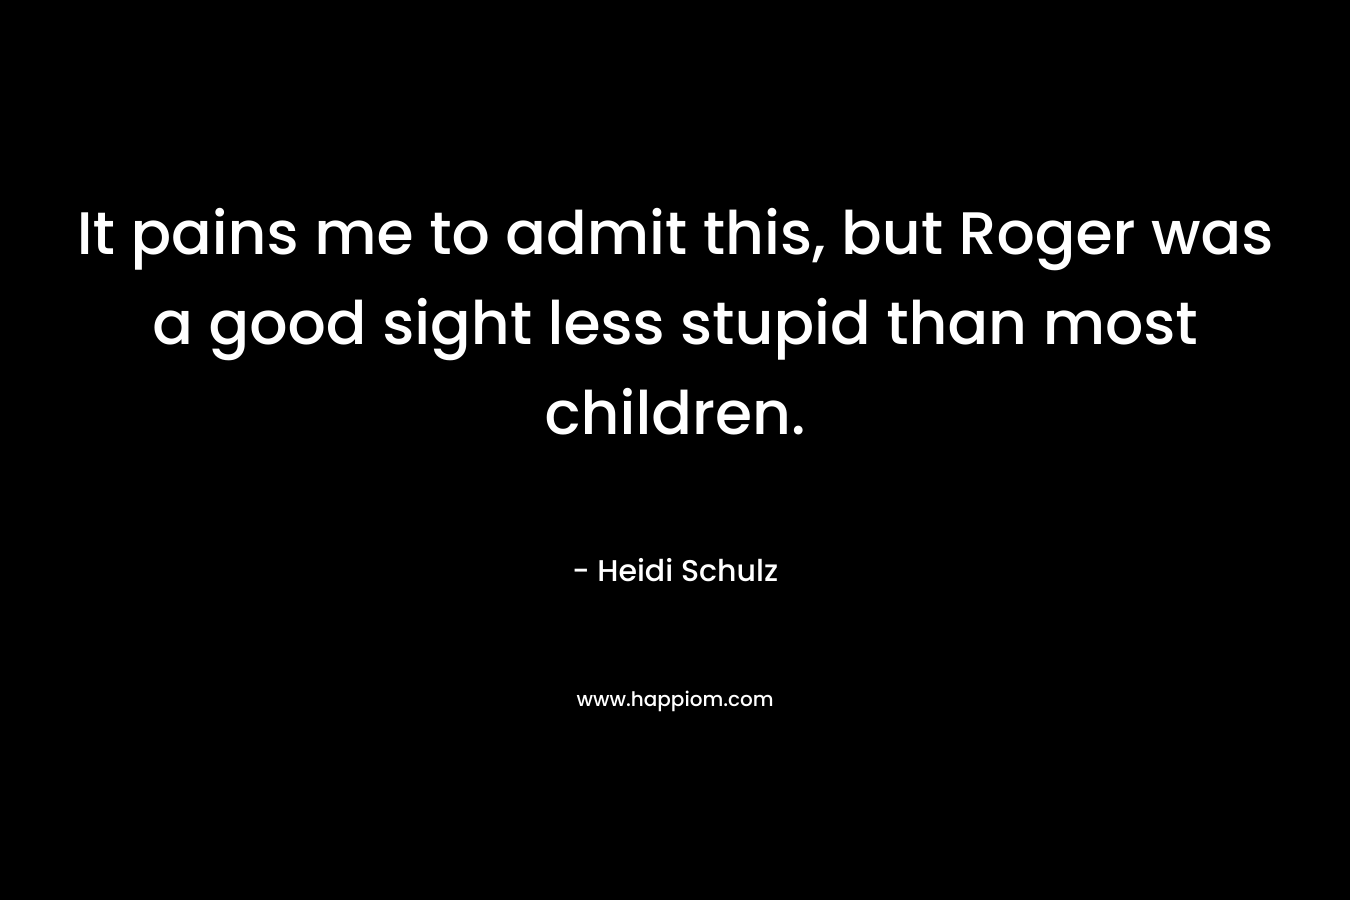 It pains me to admit this, but Roger was a good sight less stupid than most children. – Heidi Schulz